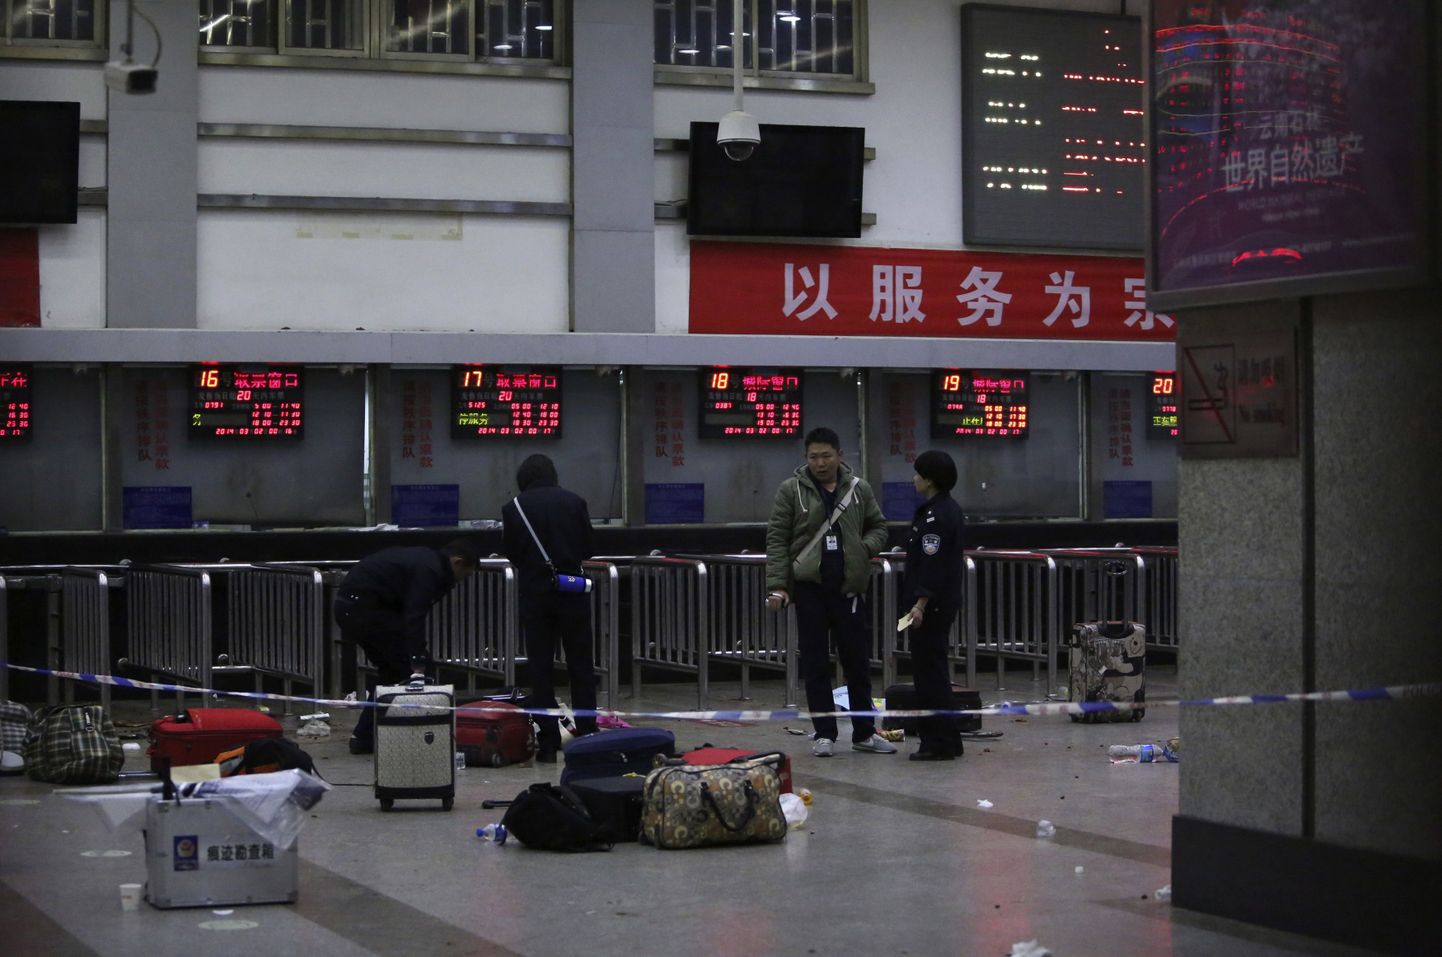 Police stand near luggages left at the ticket office after a group of armed men attacked people at Kunming railway station, Yunnan province, March 2, 2014. At least 27 people have been killed in the "violent attack" at the train station in Kunming carried out by a group of unidentified people brandishing knives, the Chinese state news agency Xinhua said on Sunday. Another 109 were injured, the report added. It said the attack had taken place late on Saturday evening. REUTERS/Stringer (CHINA - Tags: CIVIL UNREST CRIME LAW TPX IMAGES OF THE DAY) CHINA OUT. NO COMMERCIAL OR EDITORIAL SALES IN CHINA